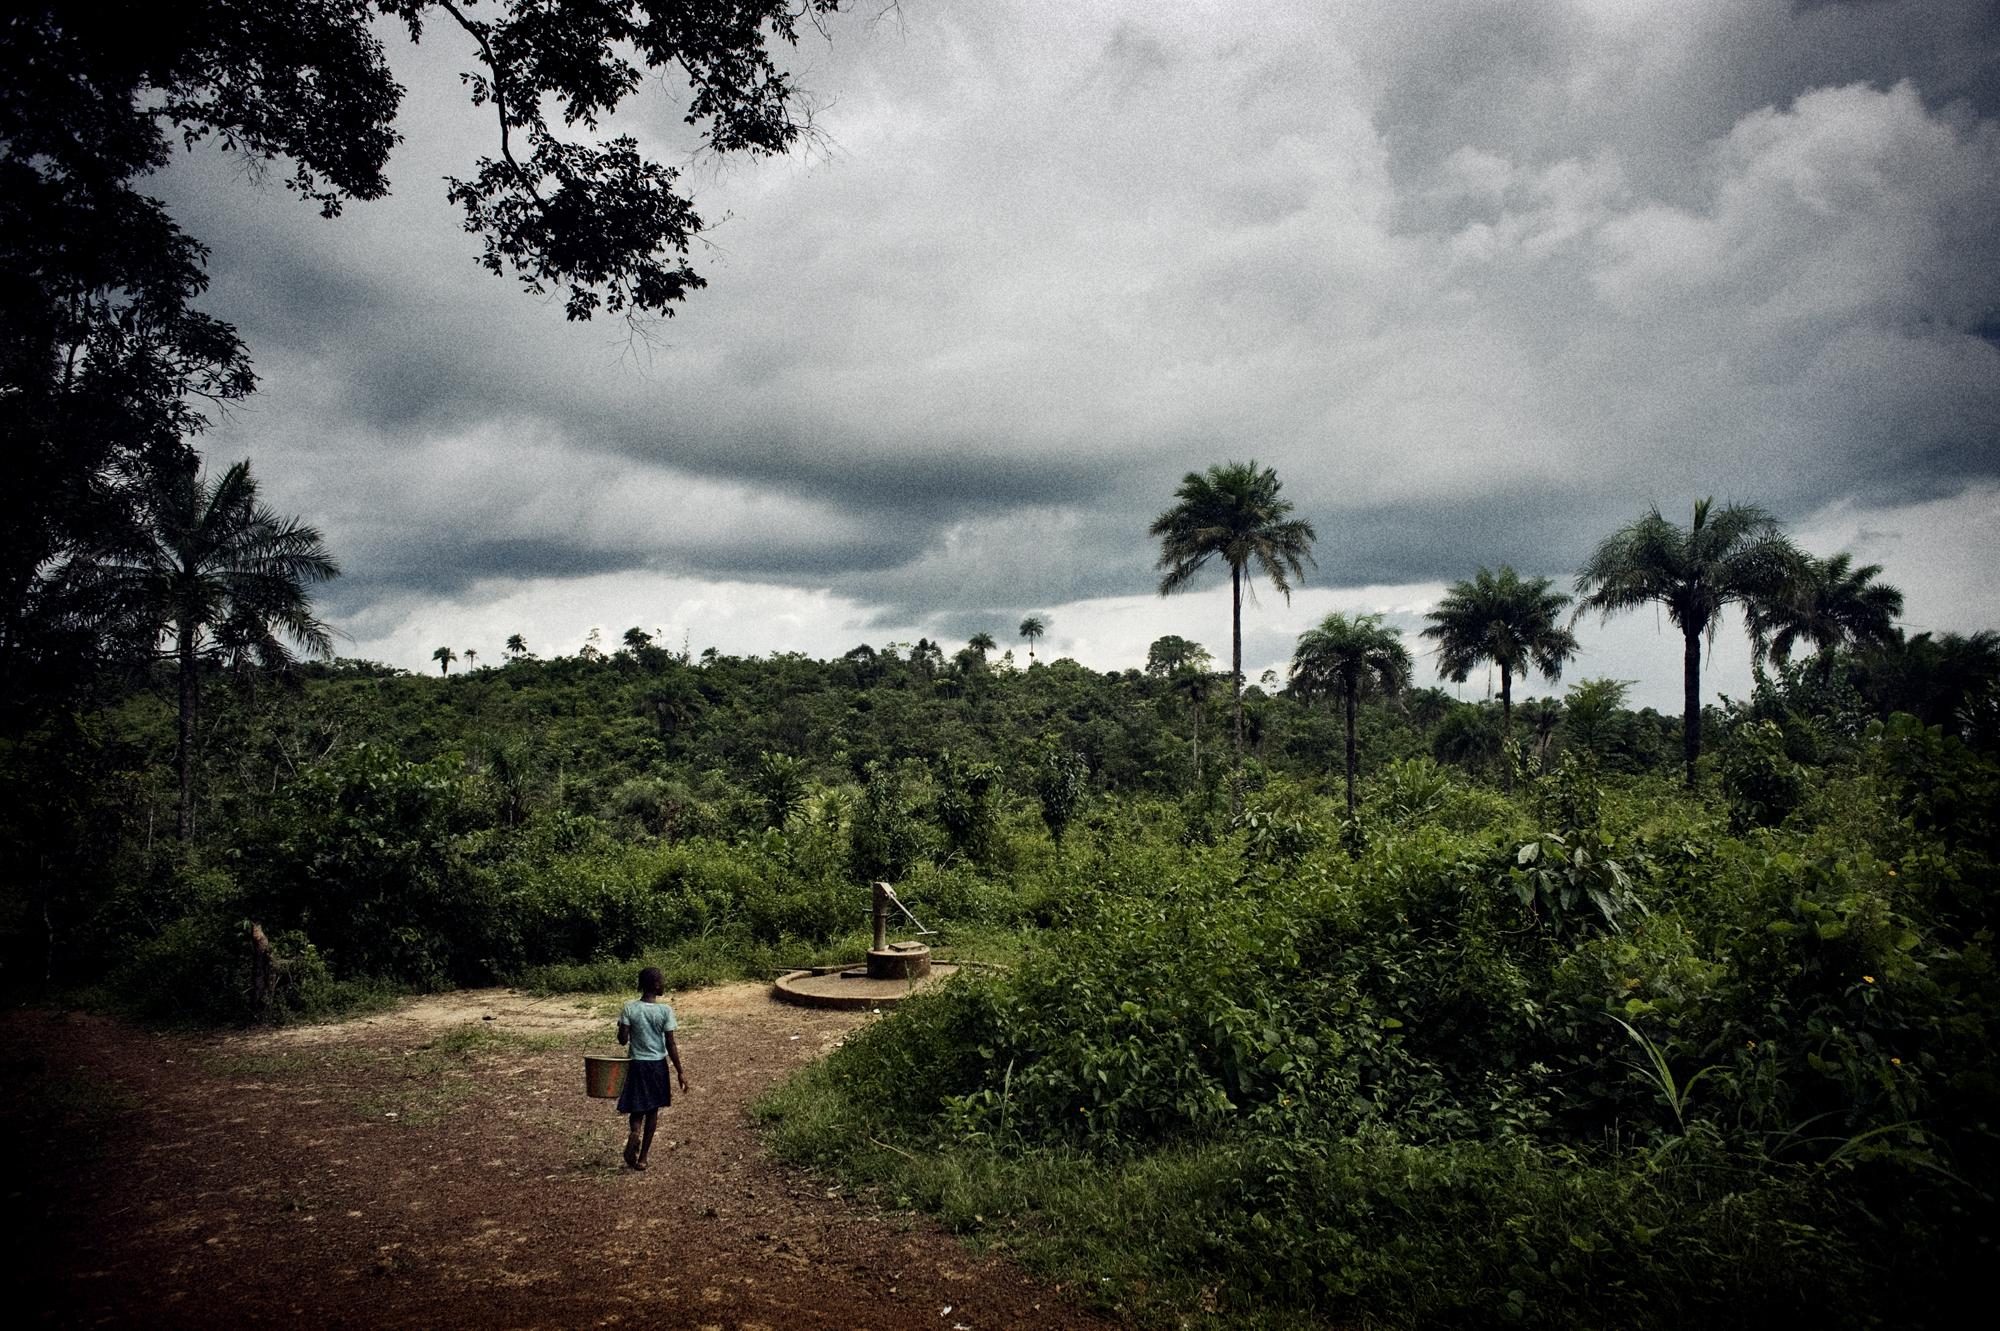 Liberia - Liberia, Manamu
October 2008.
A young girl is going to...